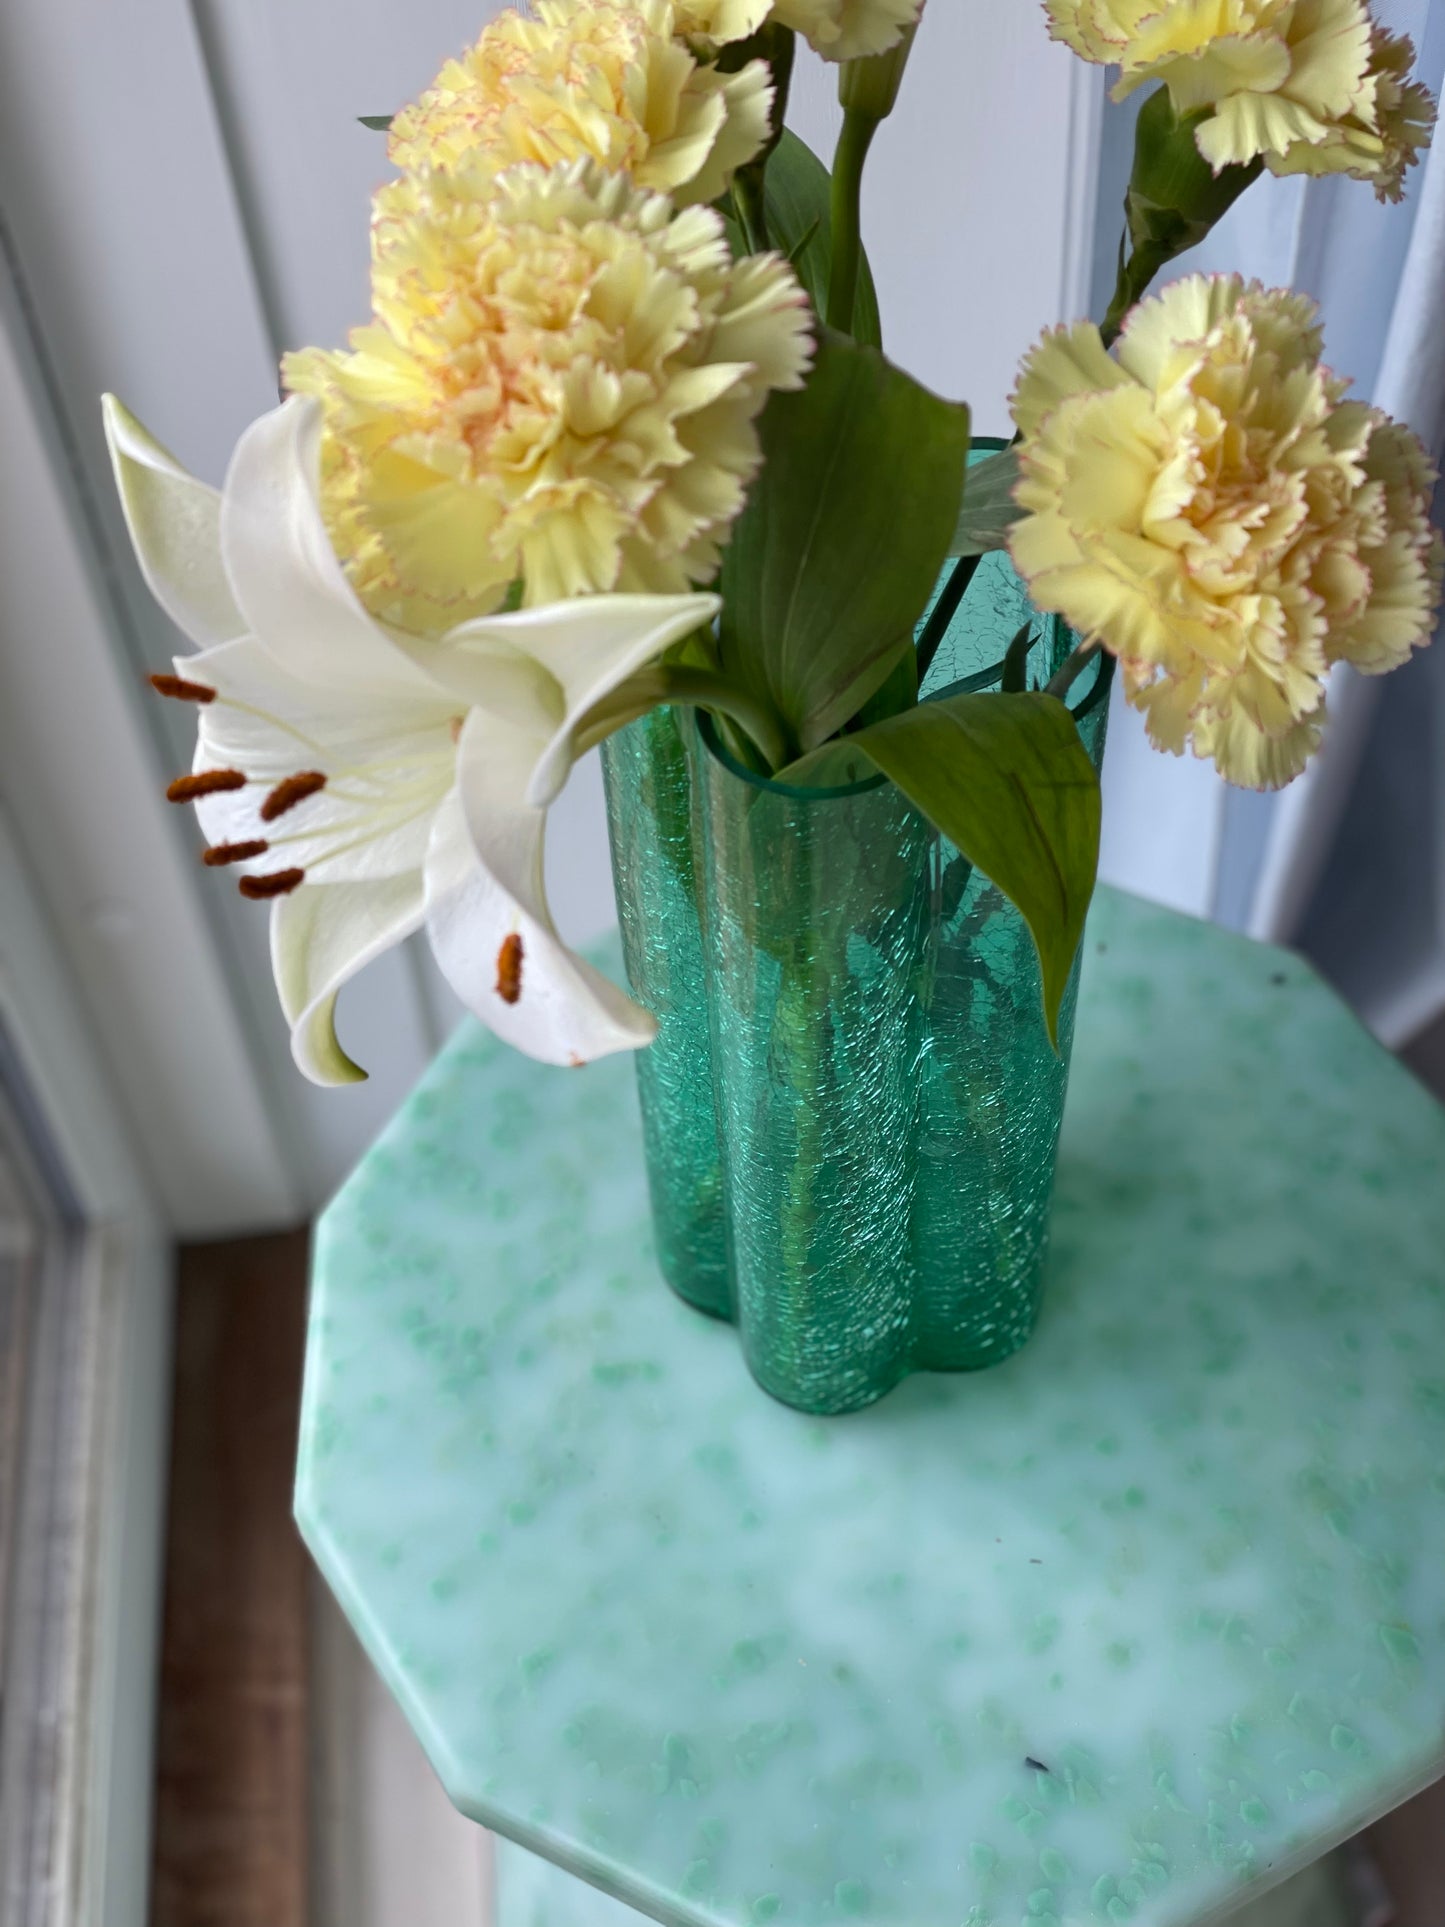 Glass vase in 'cracked' green glass